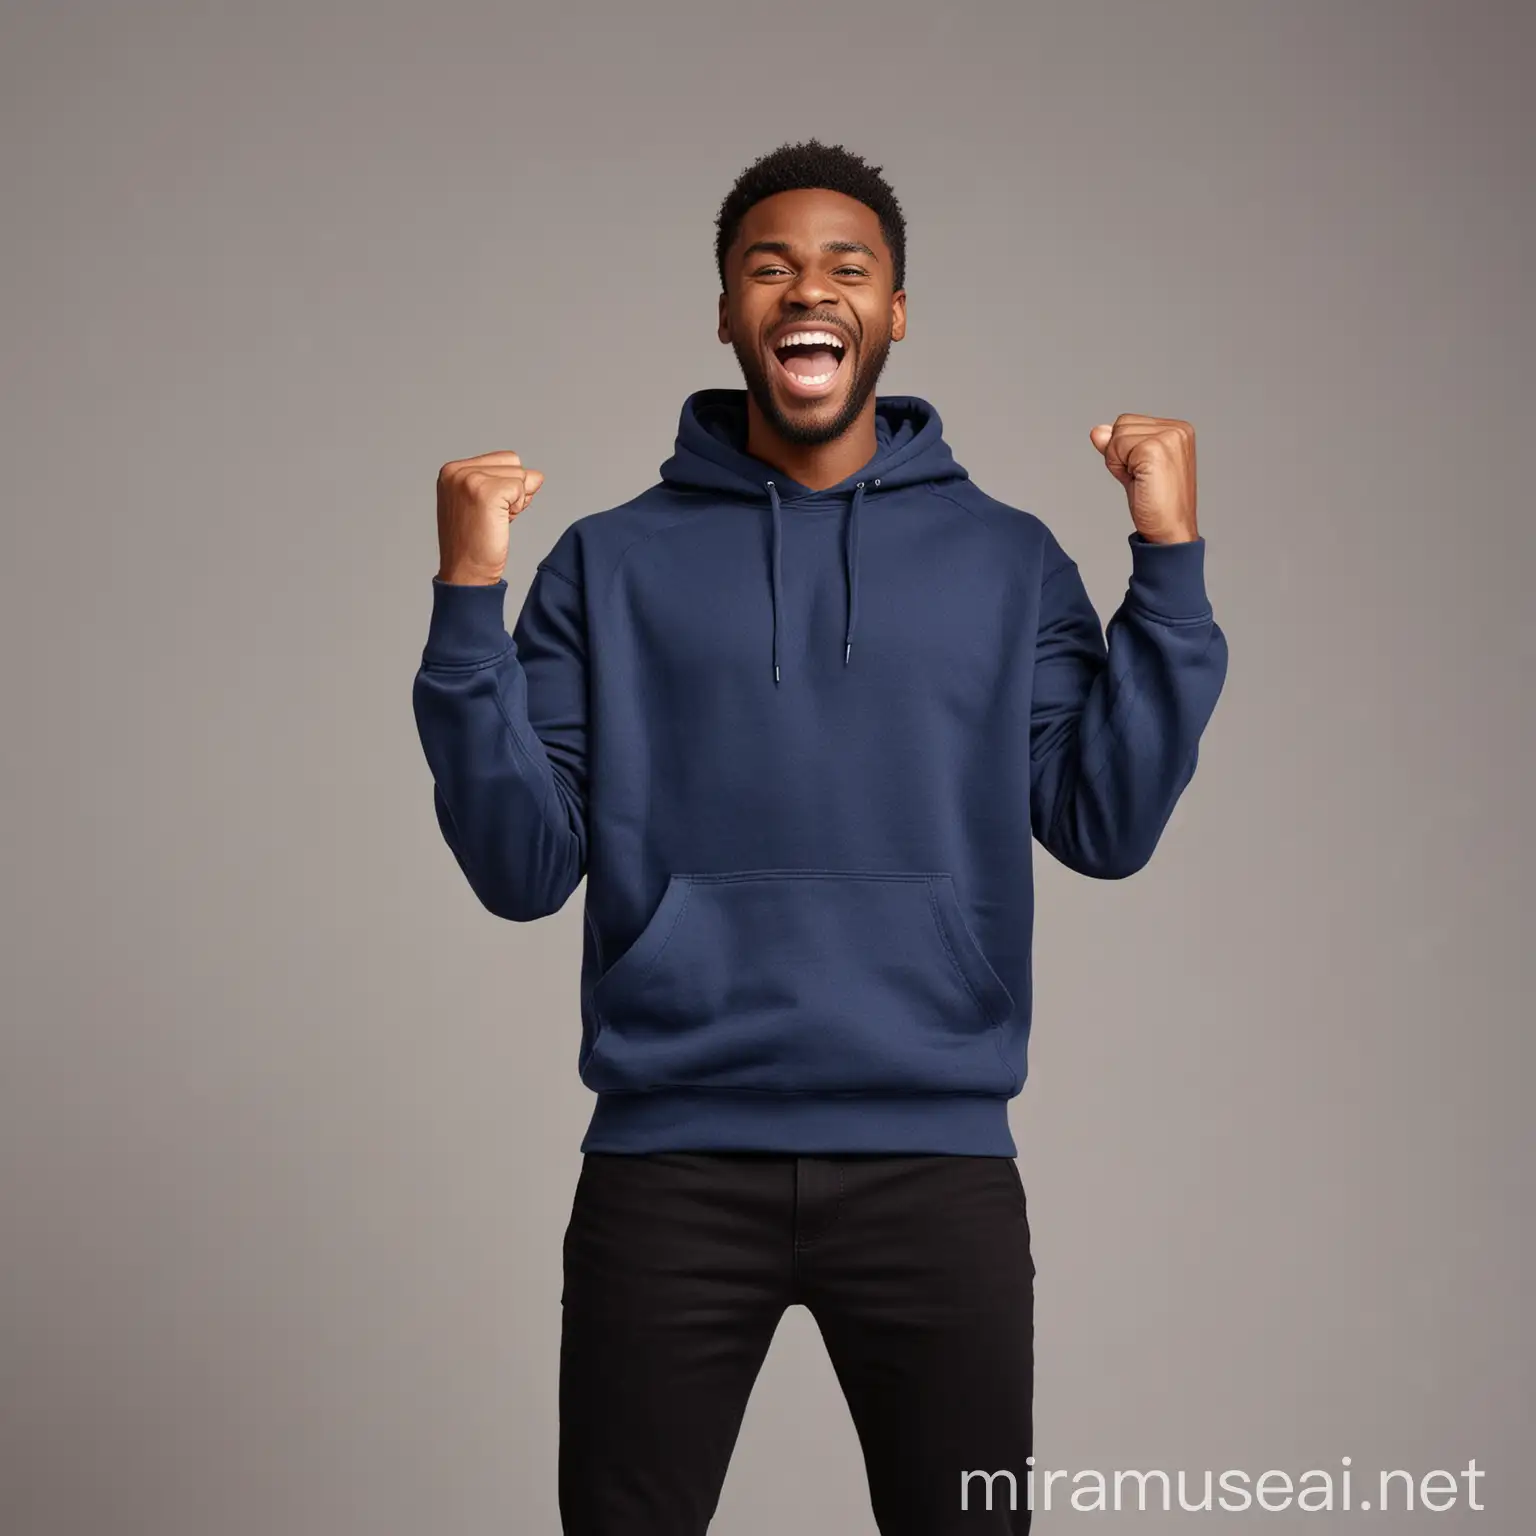 Excited  black African guy cheerfully smiling, putting on dark blue sweatshirt and black pants , raising clenched fist up , shouting with energy to victory , standing against gray space , in front of camera